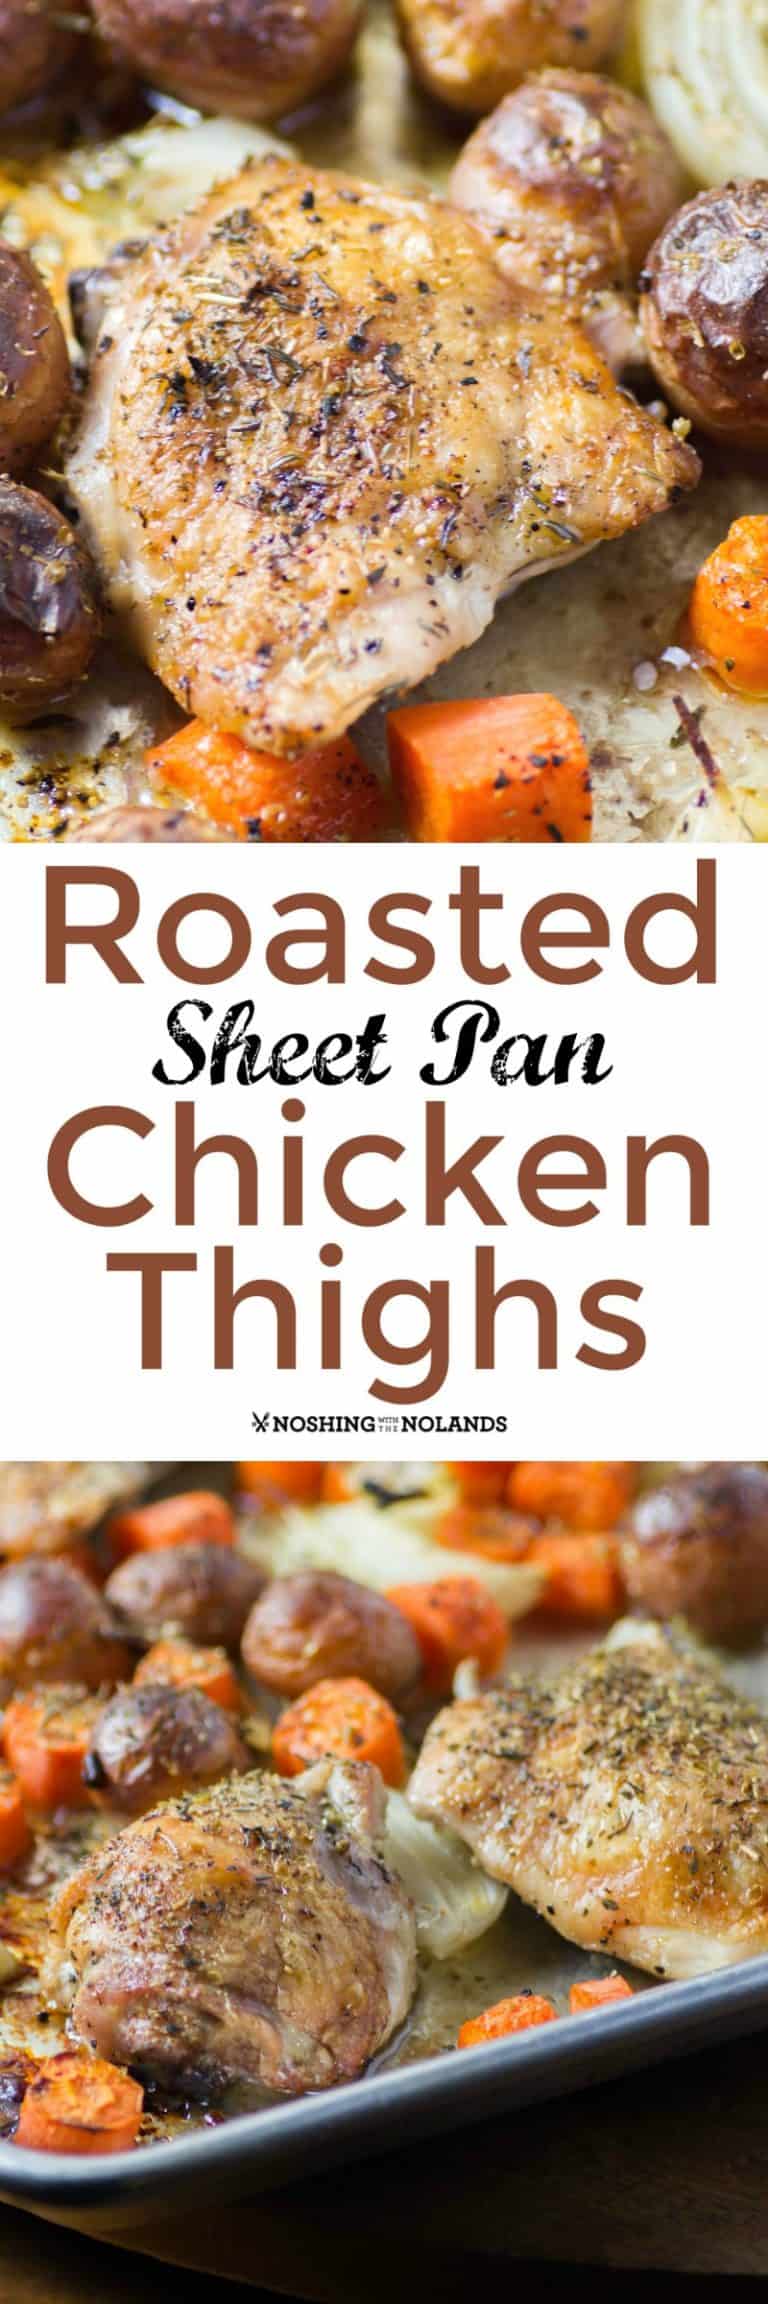 Roasted Sheet Pan Chicken Thighs are simple to make yet scrumptious